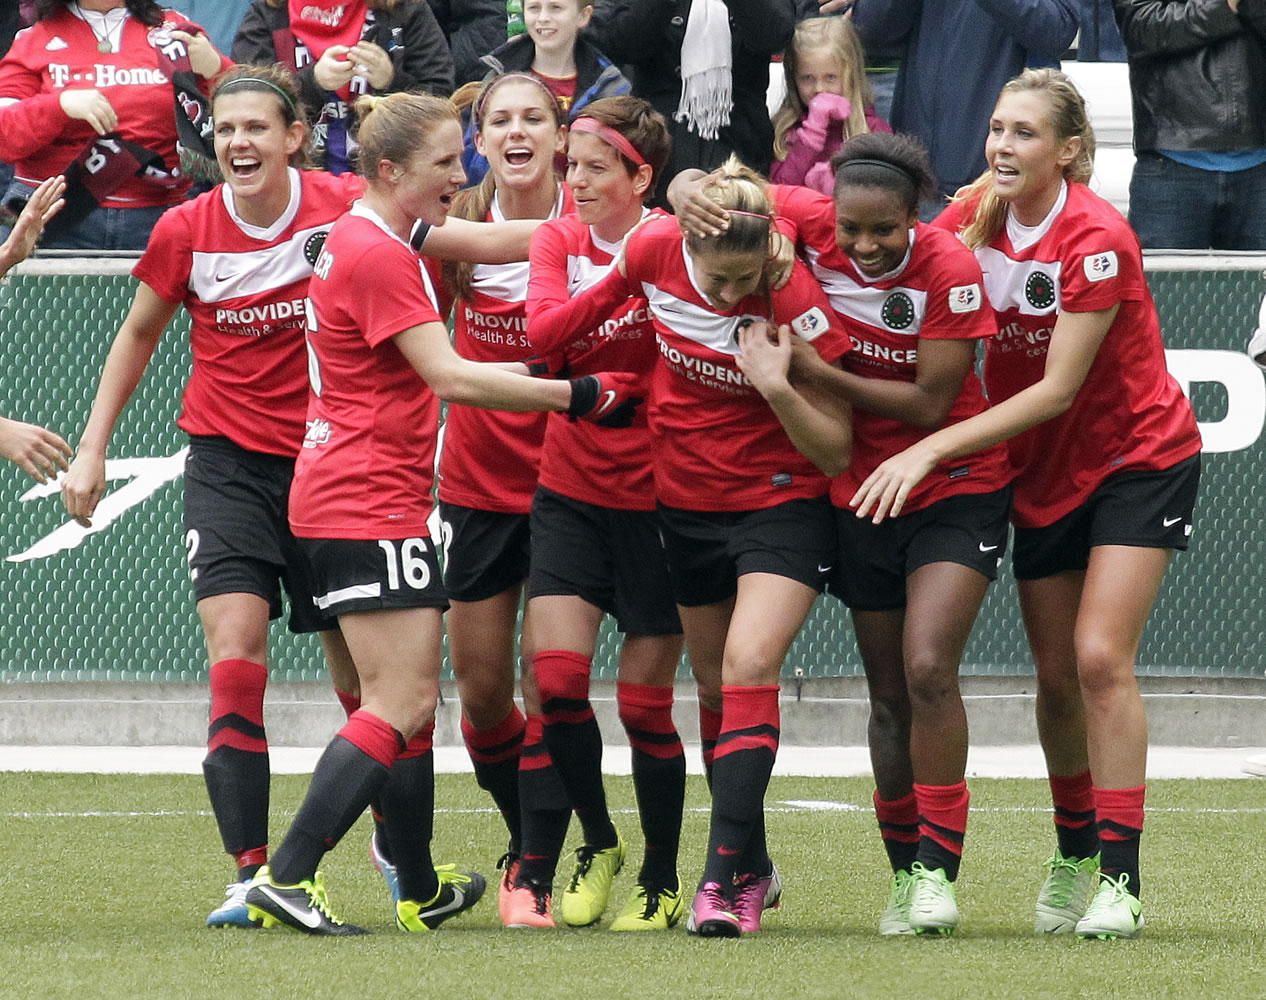 The Portland Thorns celebrate after Marian Dougherty, third from right, scored the team's first goal on Sunday.